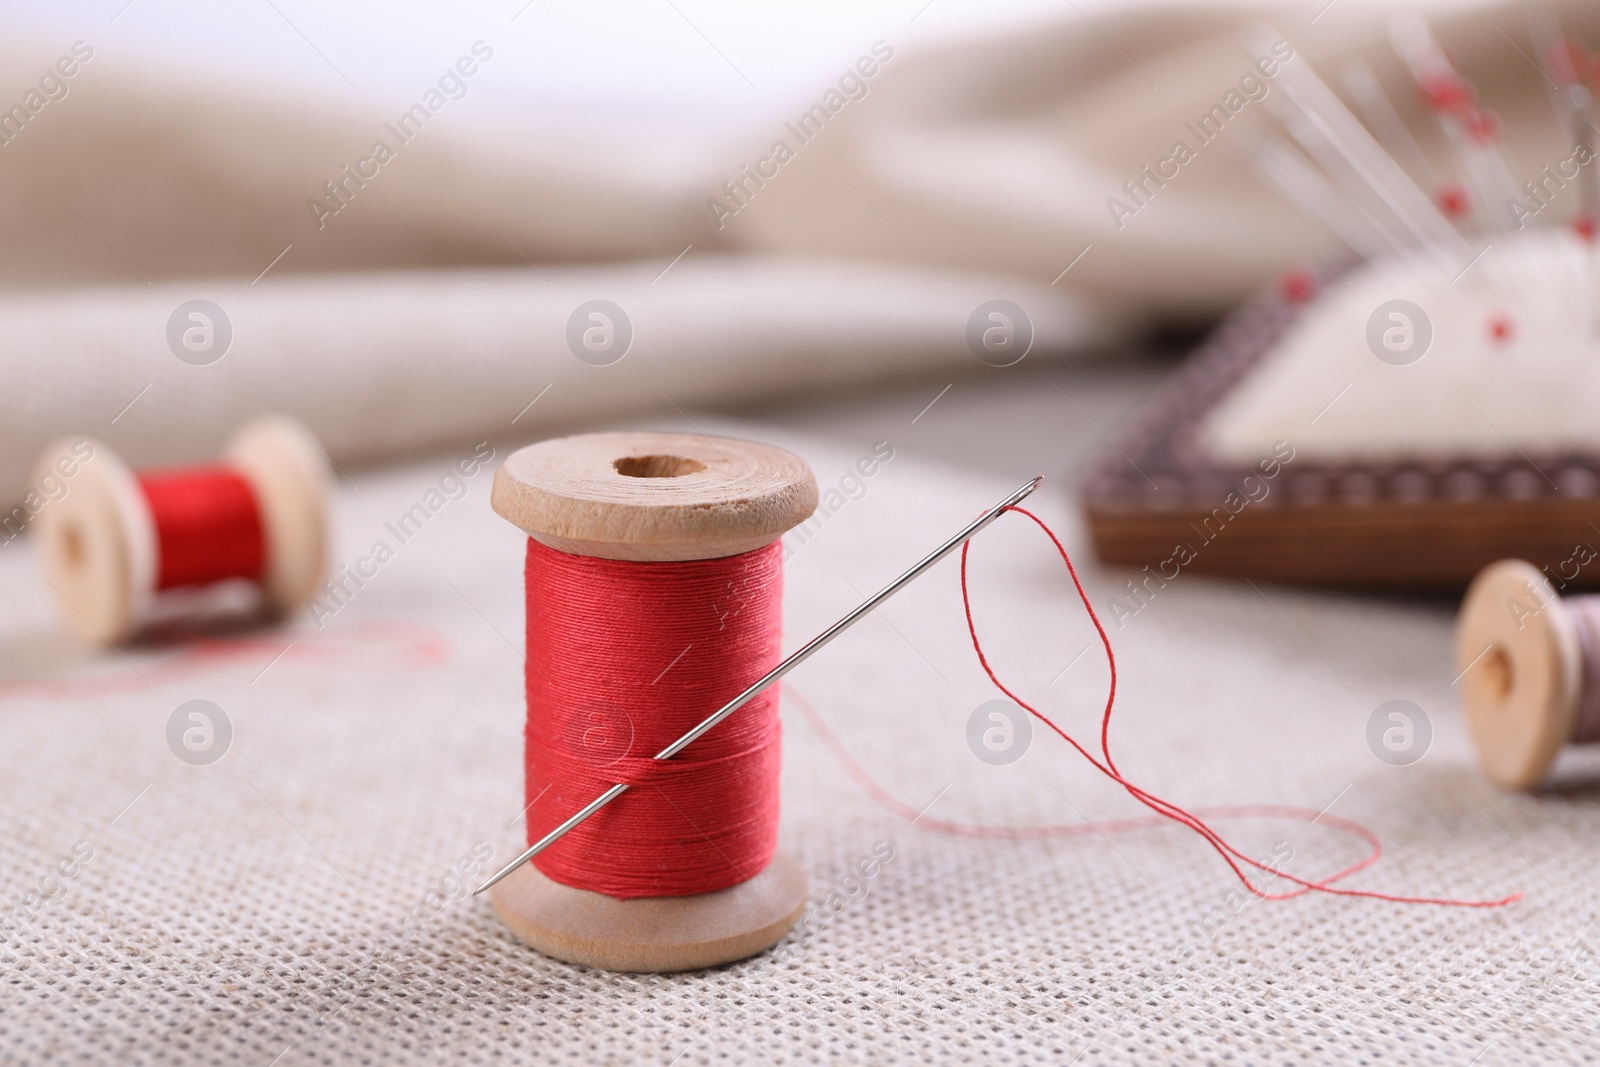 Photo of Spool of red sewing thread with needle on white fabric